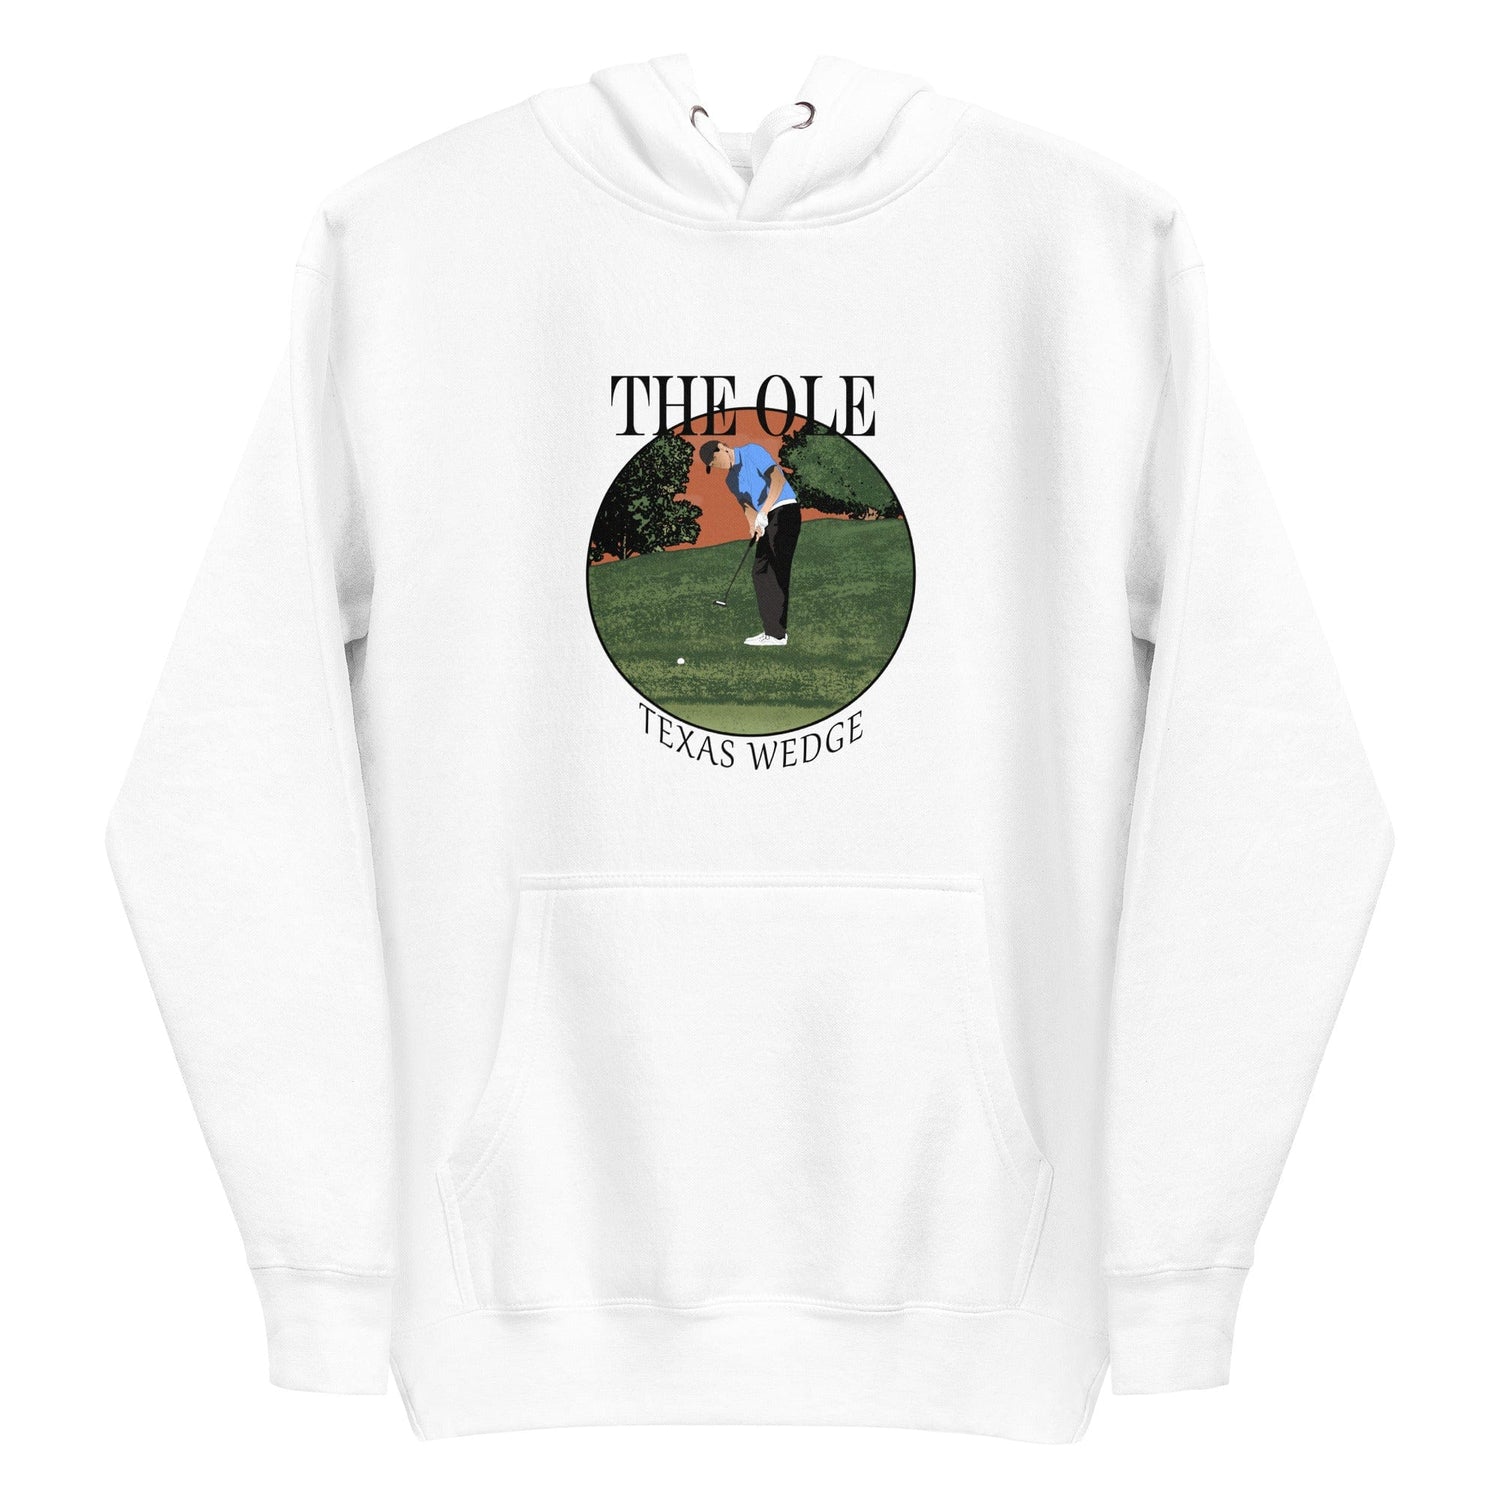 A Texas Wedge Hoodie with an image of a man playing golf by Cart Jockey Golf.